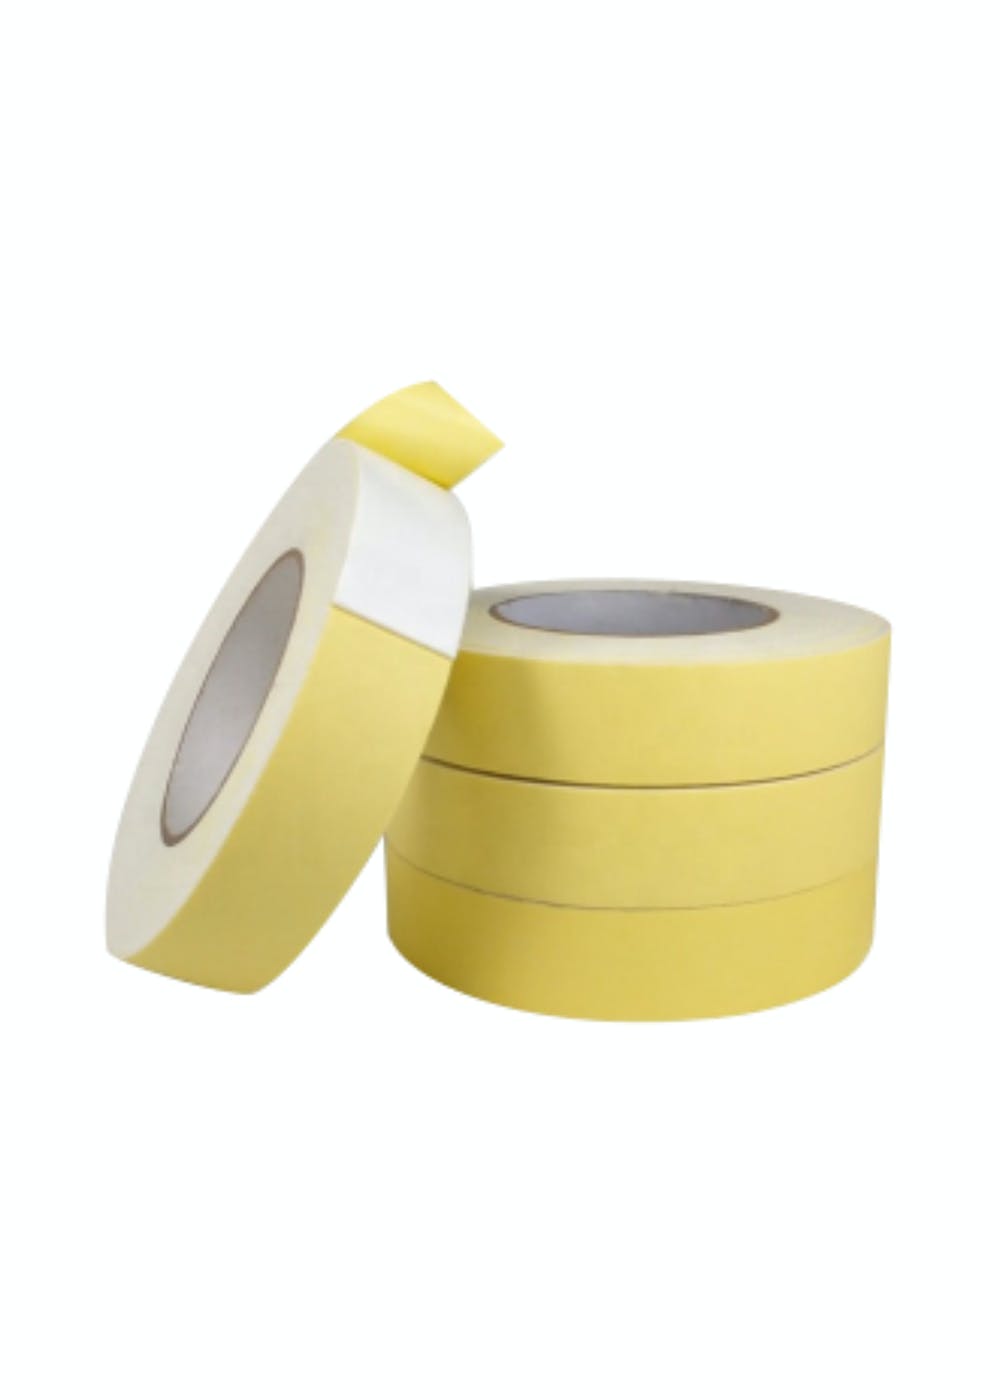 DIGISMART® Masking Tape, Labelling, Painting, no leave adhesive, Paper Masking tape pack